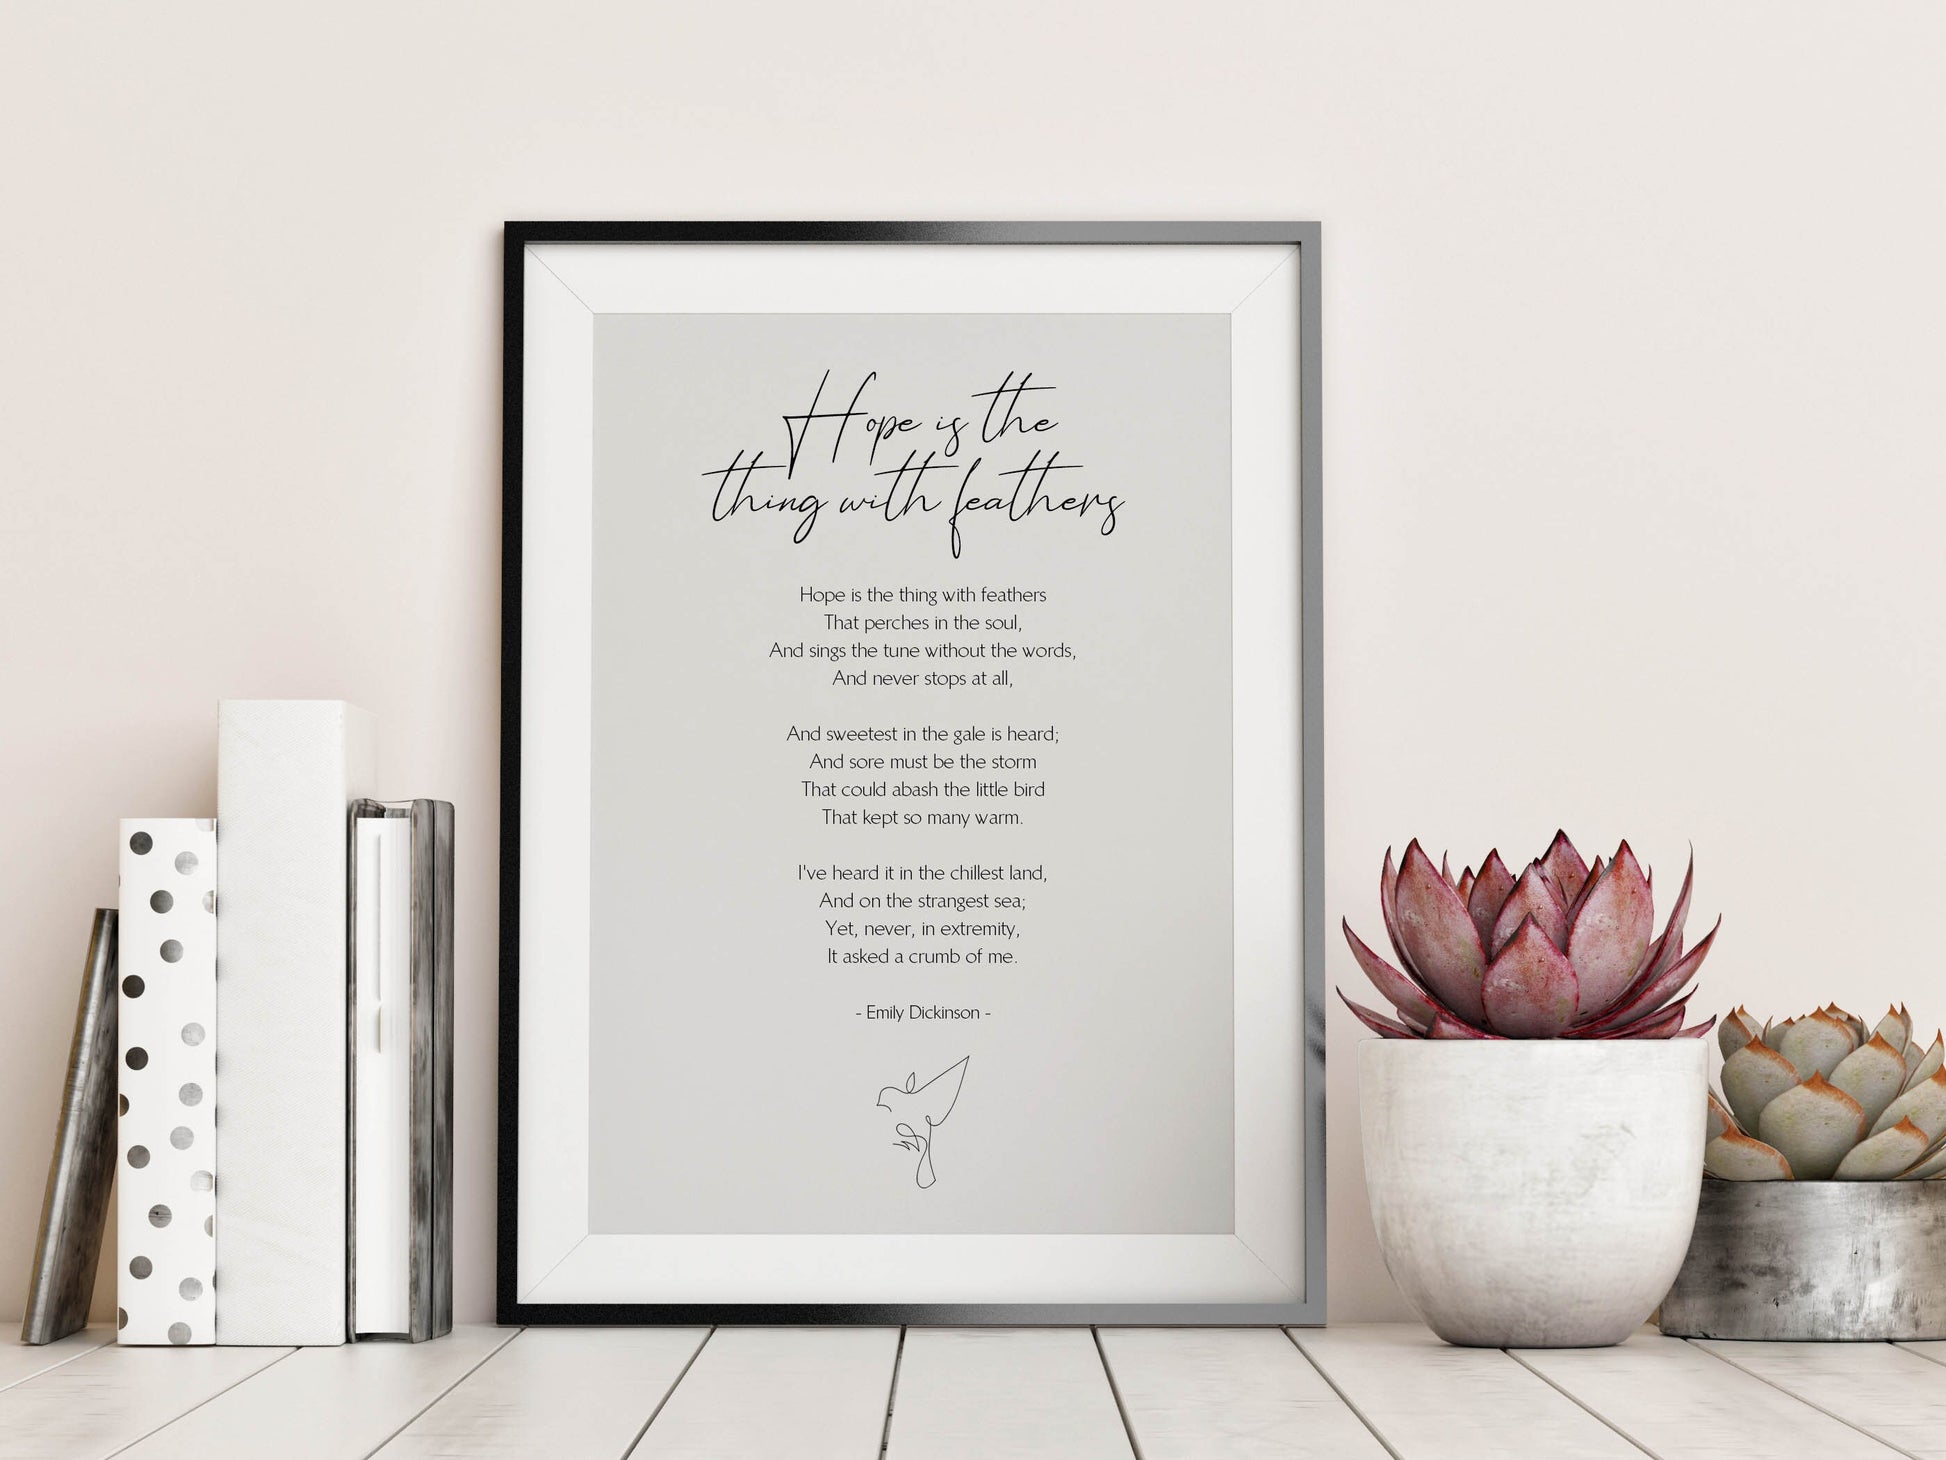 Hope is the thing with feather Print, Framed Poem by Emily Dickinson, Hope Poster, Wall decor, living room artwork